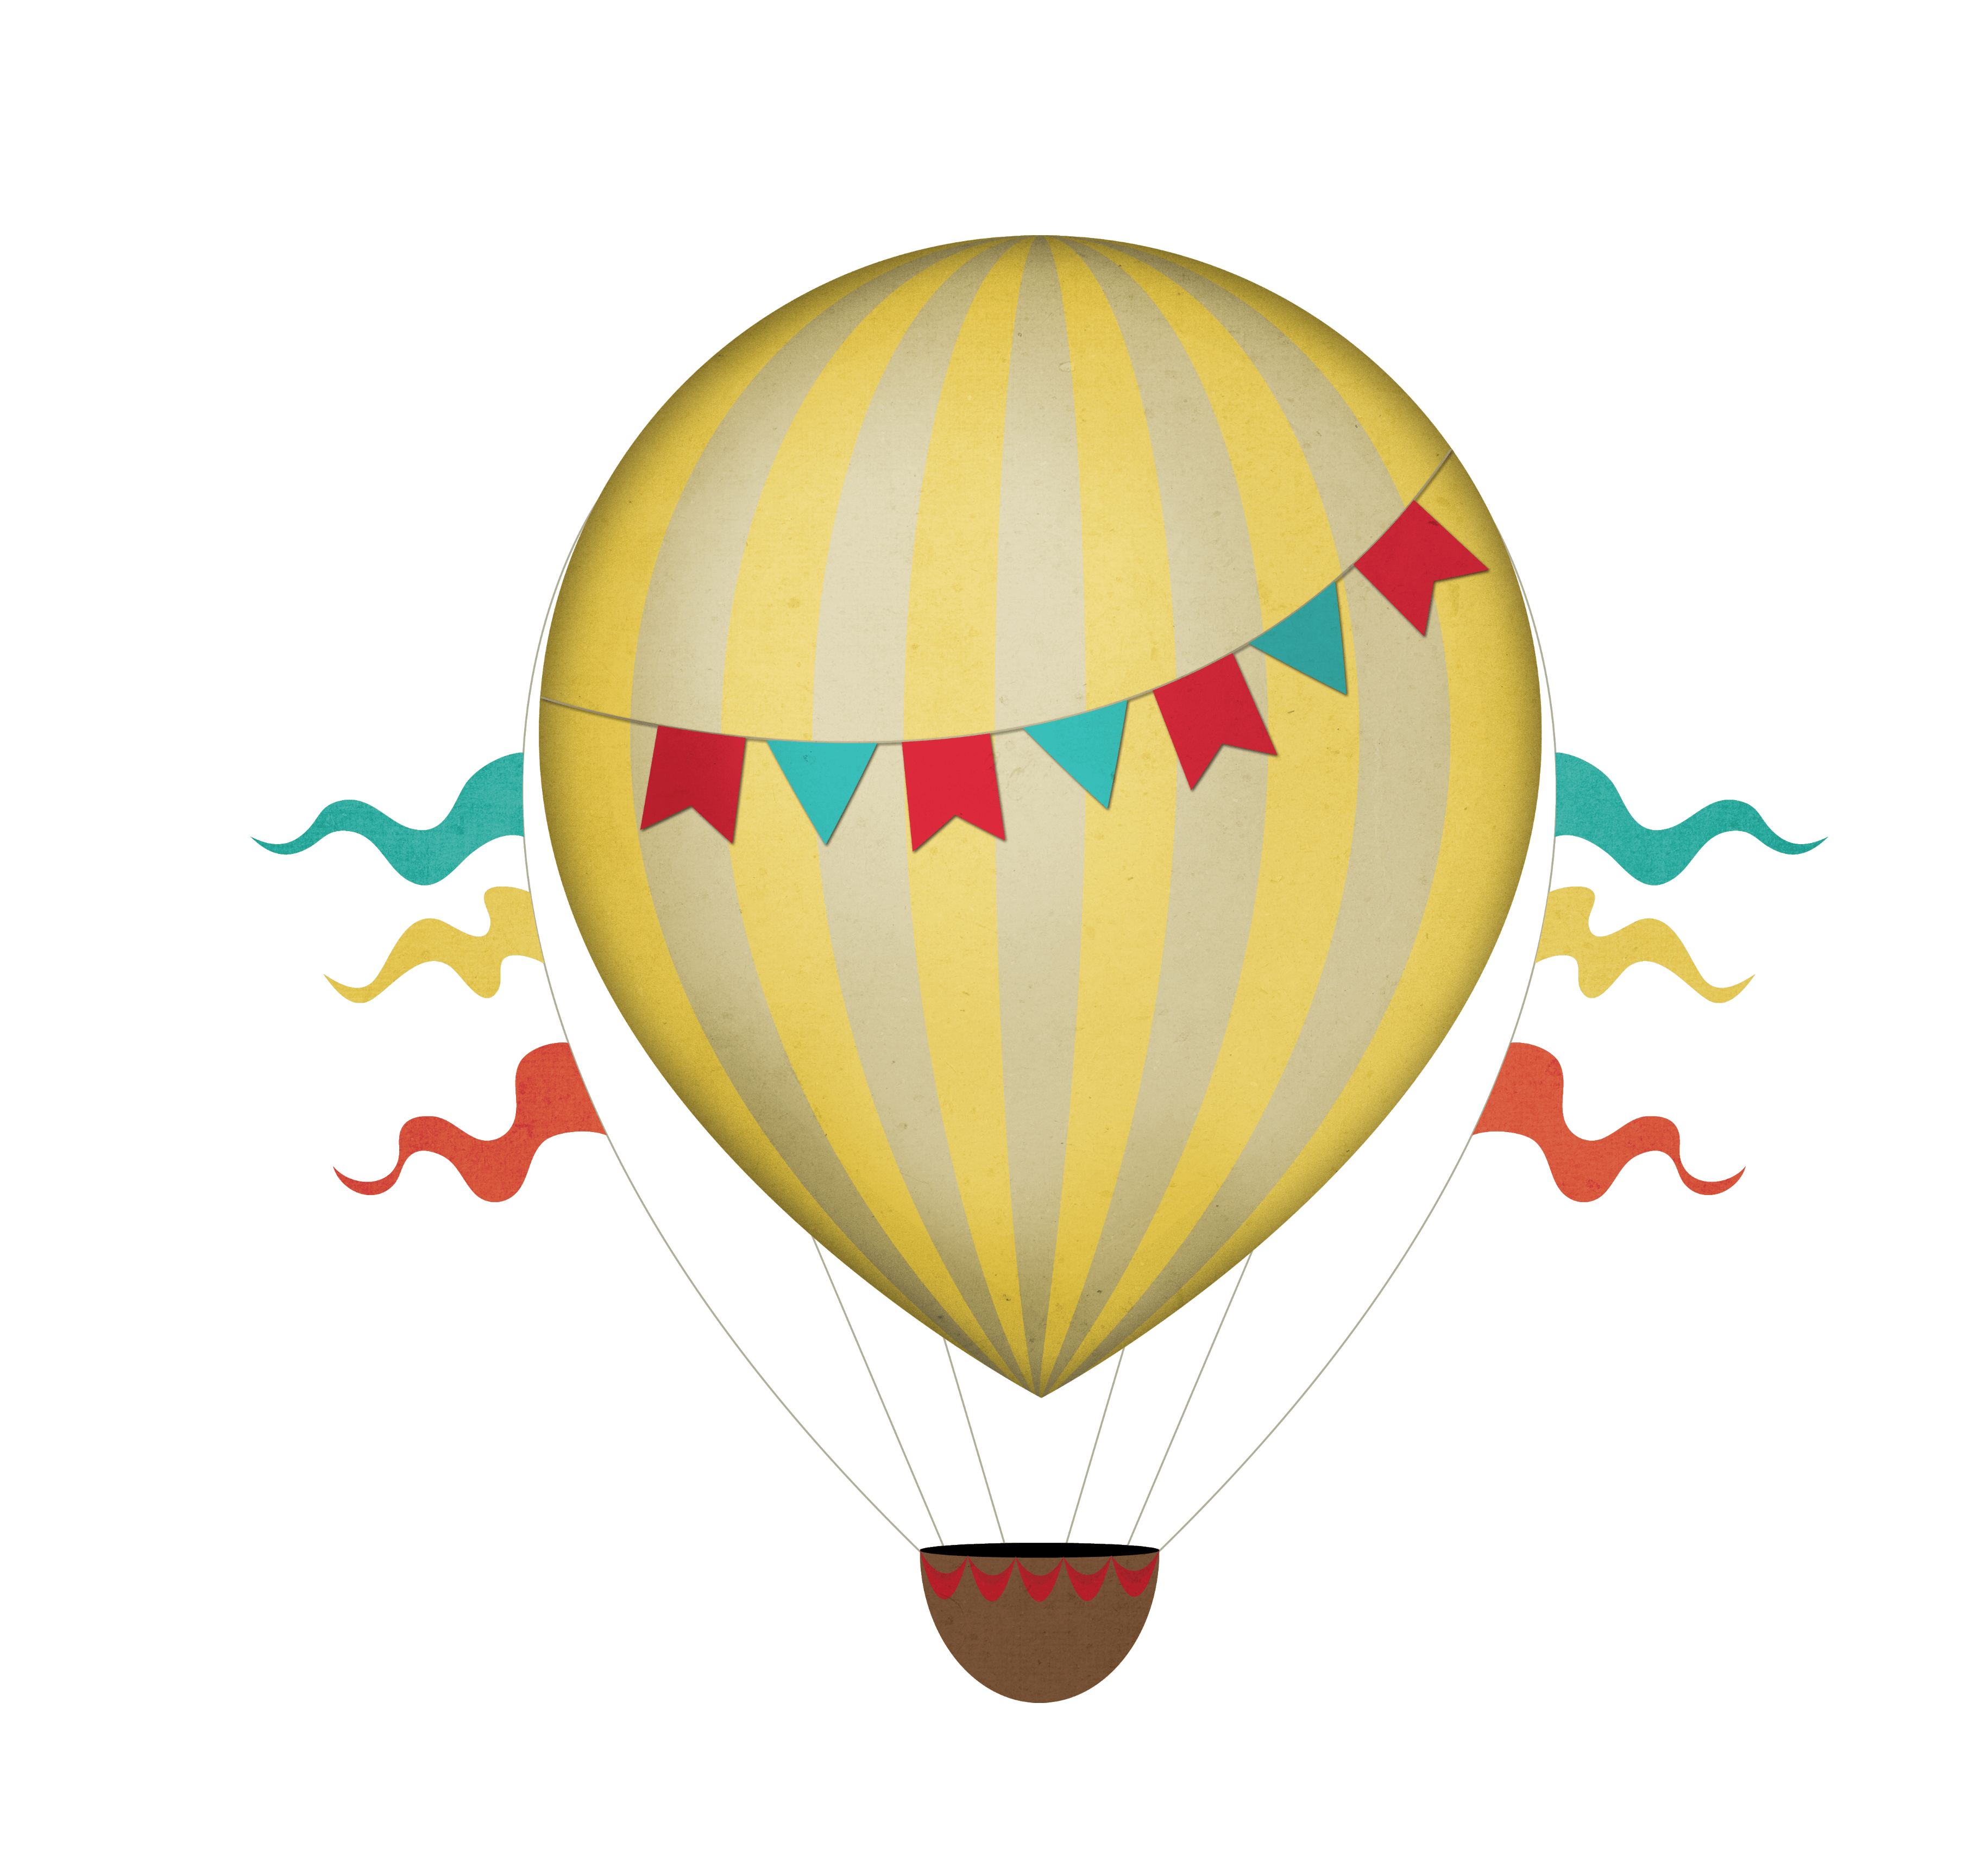 Hot Air Balloon PNG HD and HQ Image pngteam.com